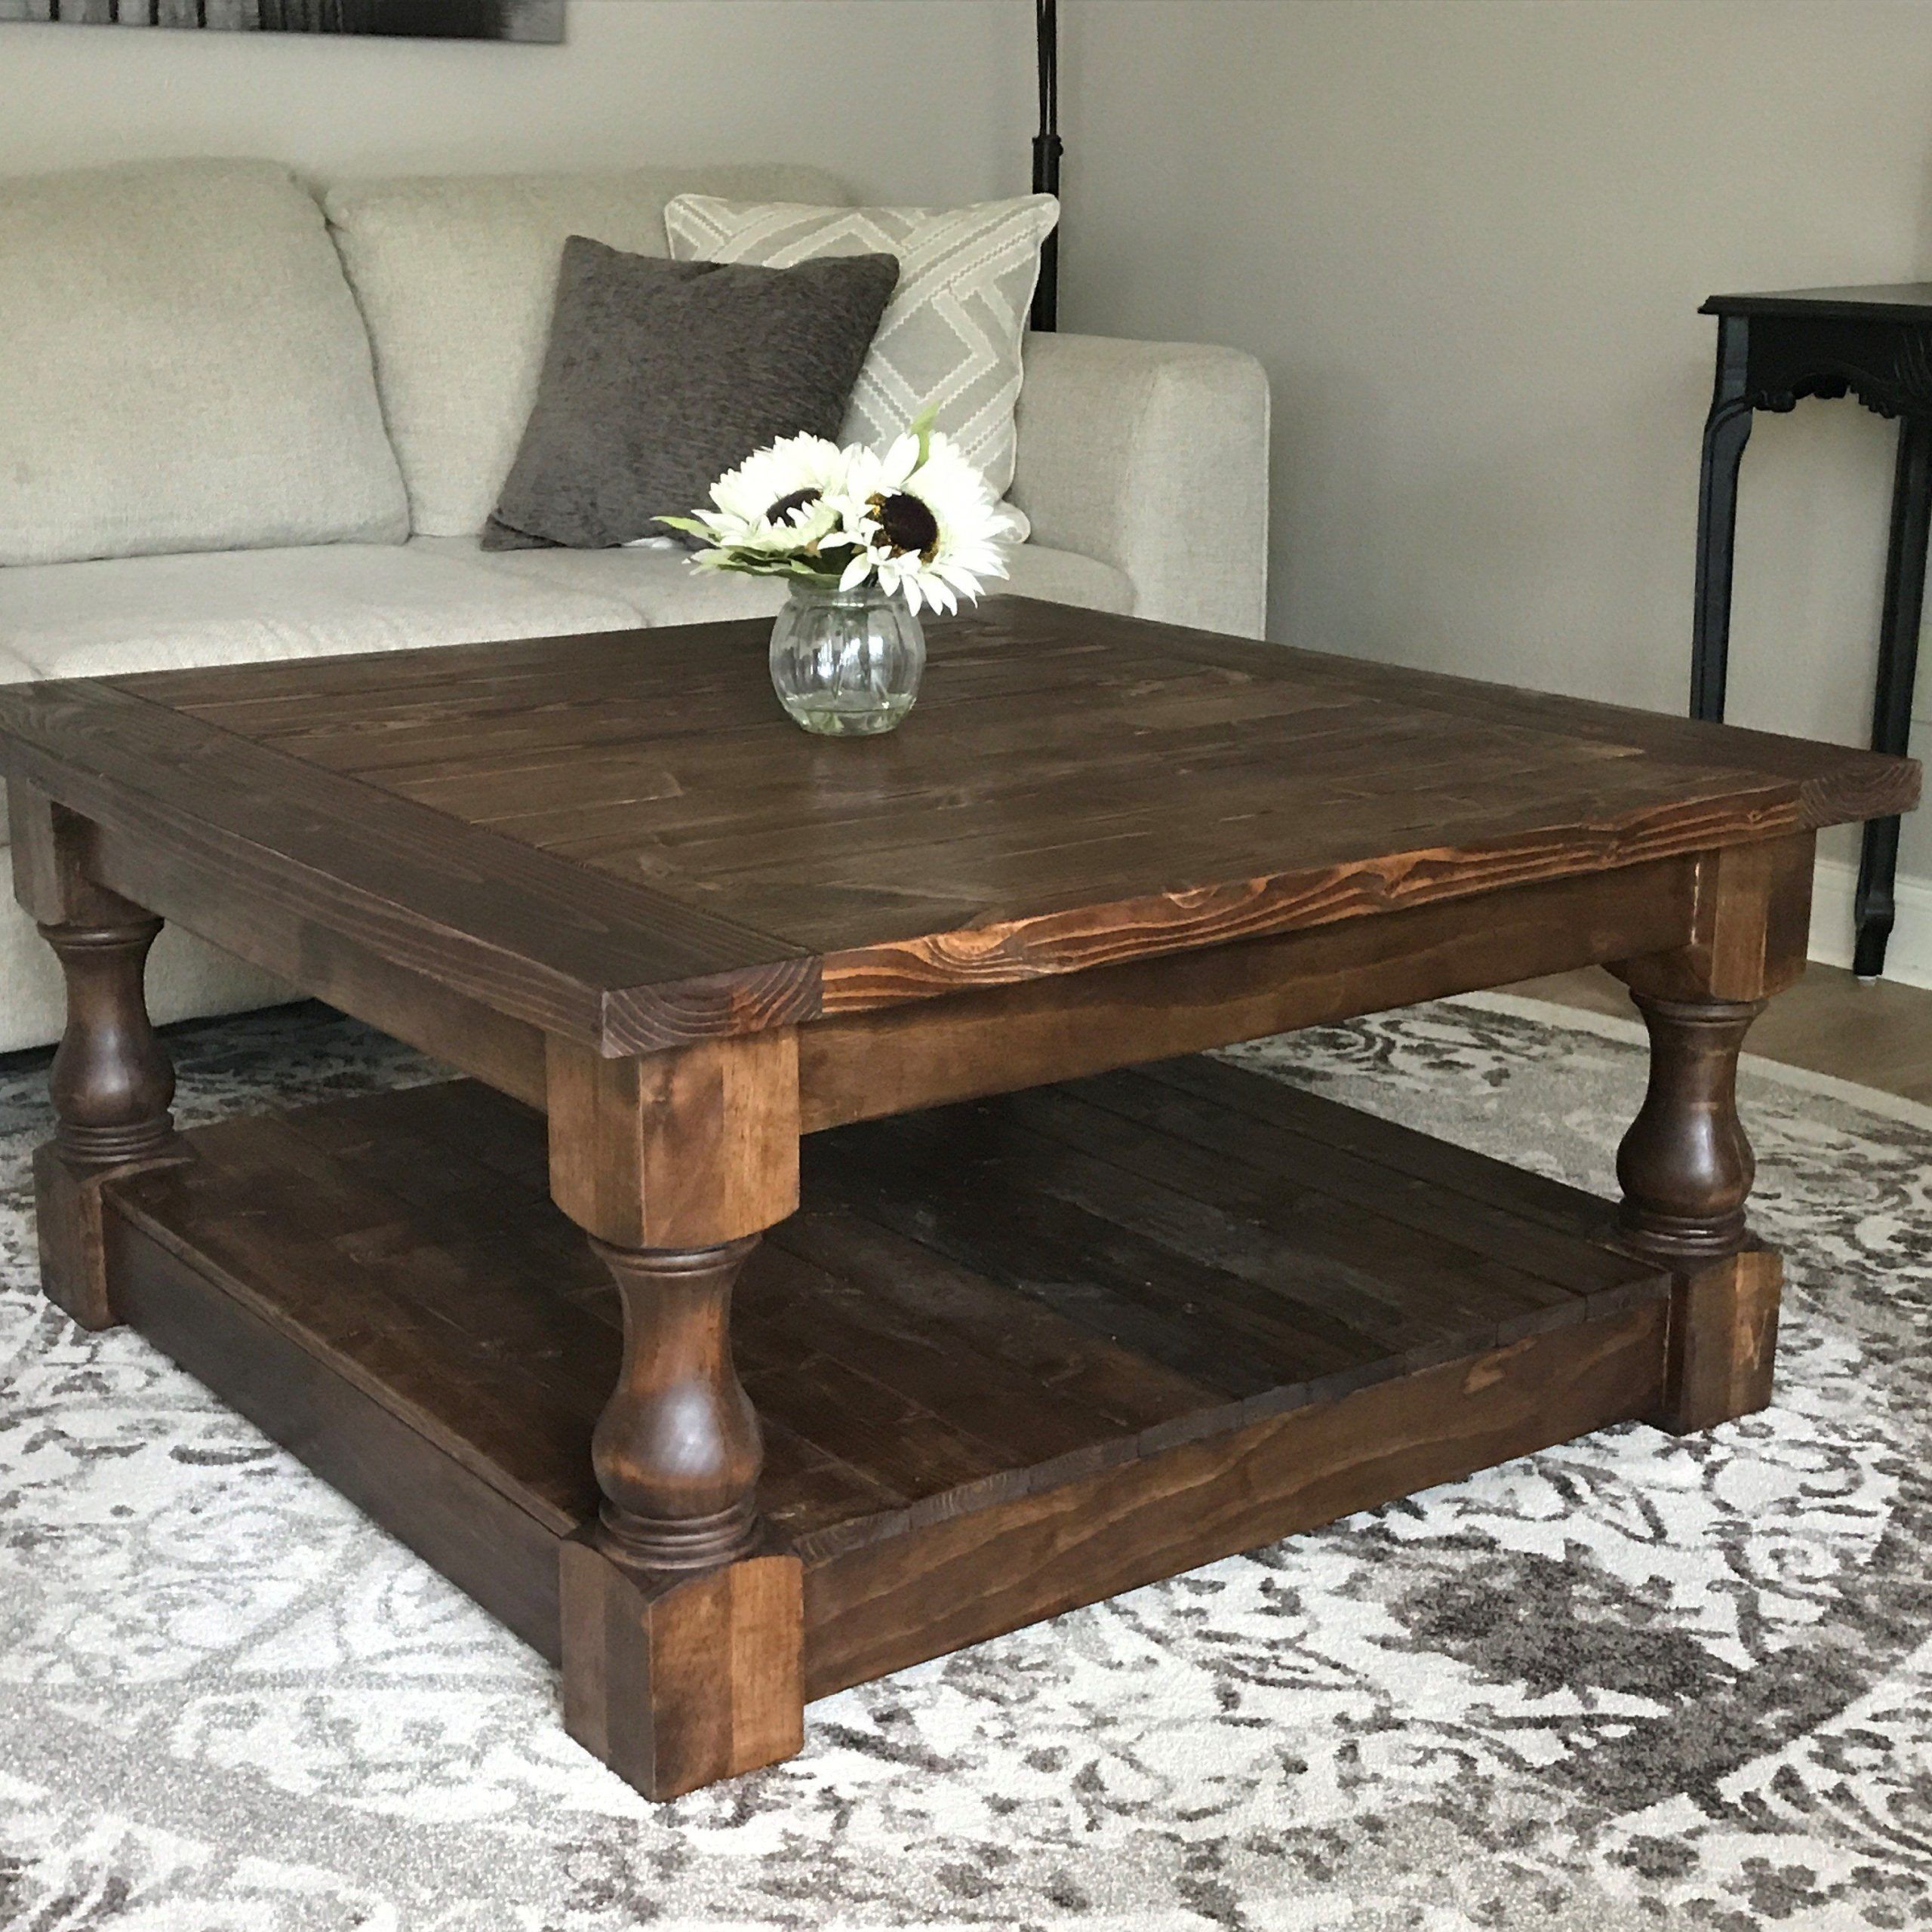 10+ Rustic Coffee Table Decor – Decoomo Intended For Brown Rustic Coffee Tables (View 12 of 15)